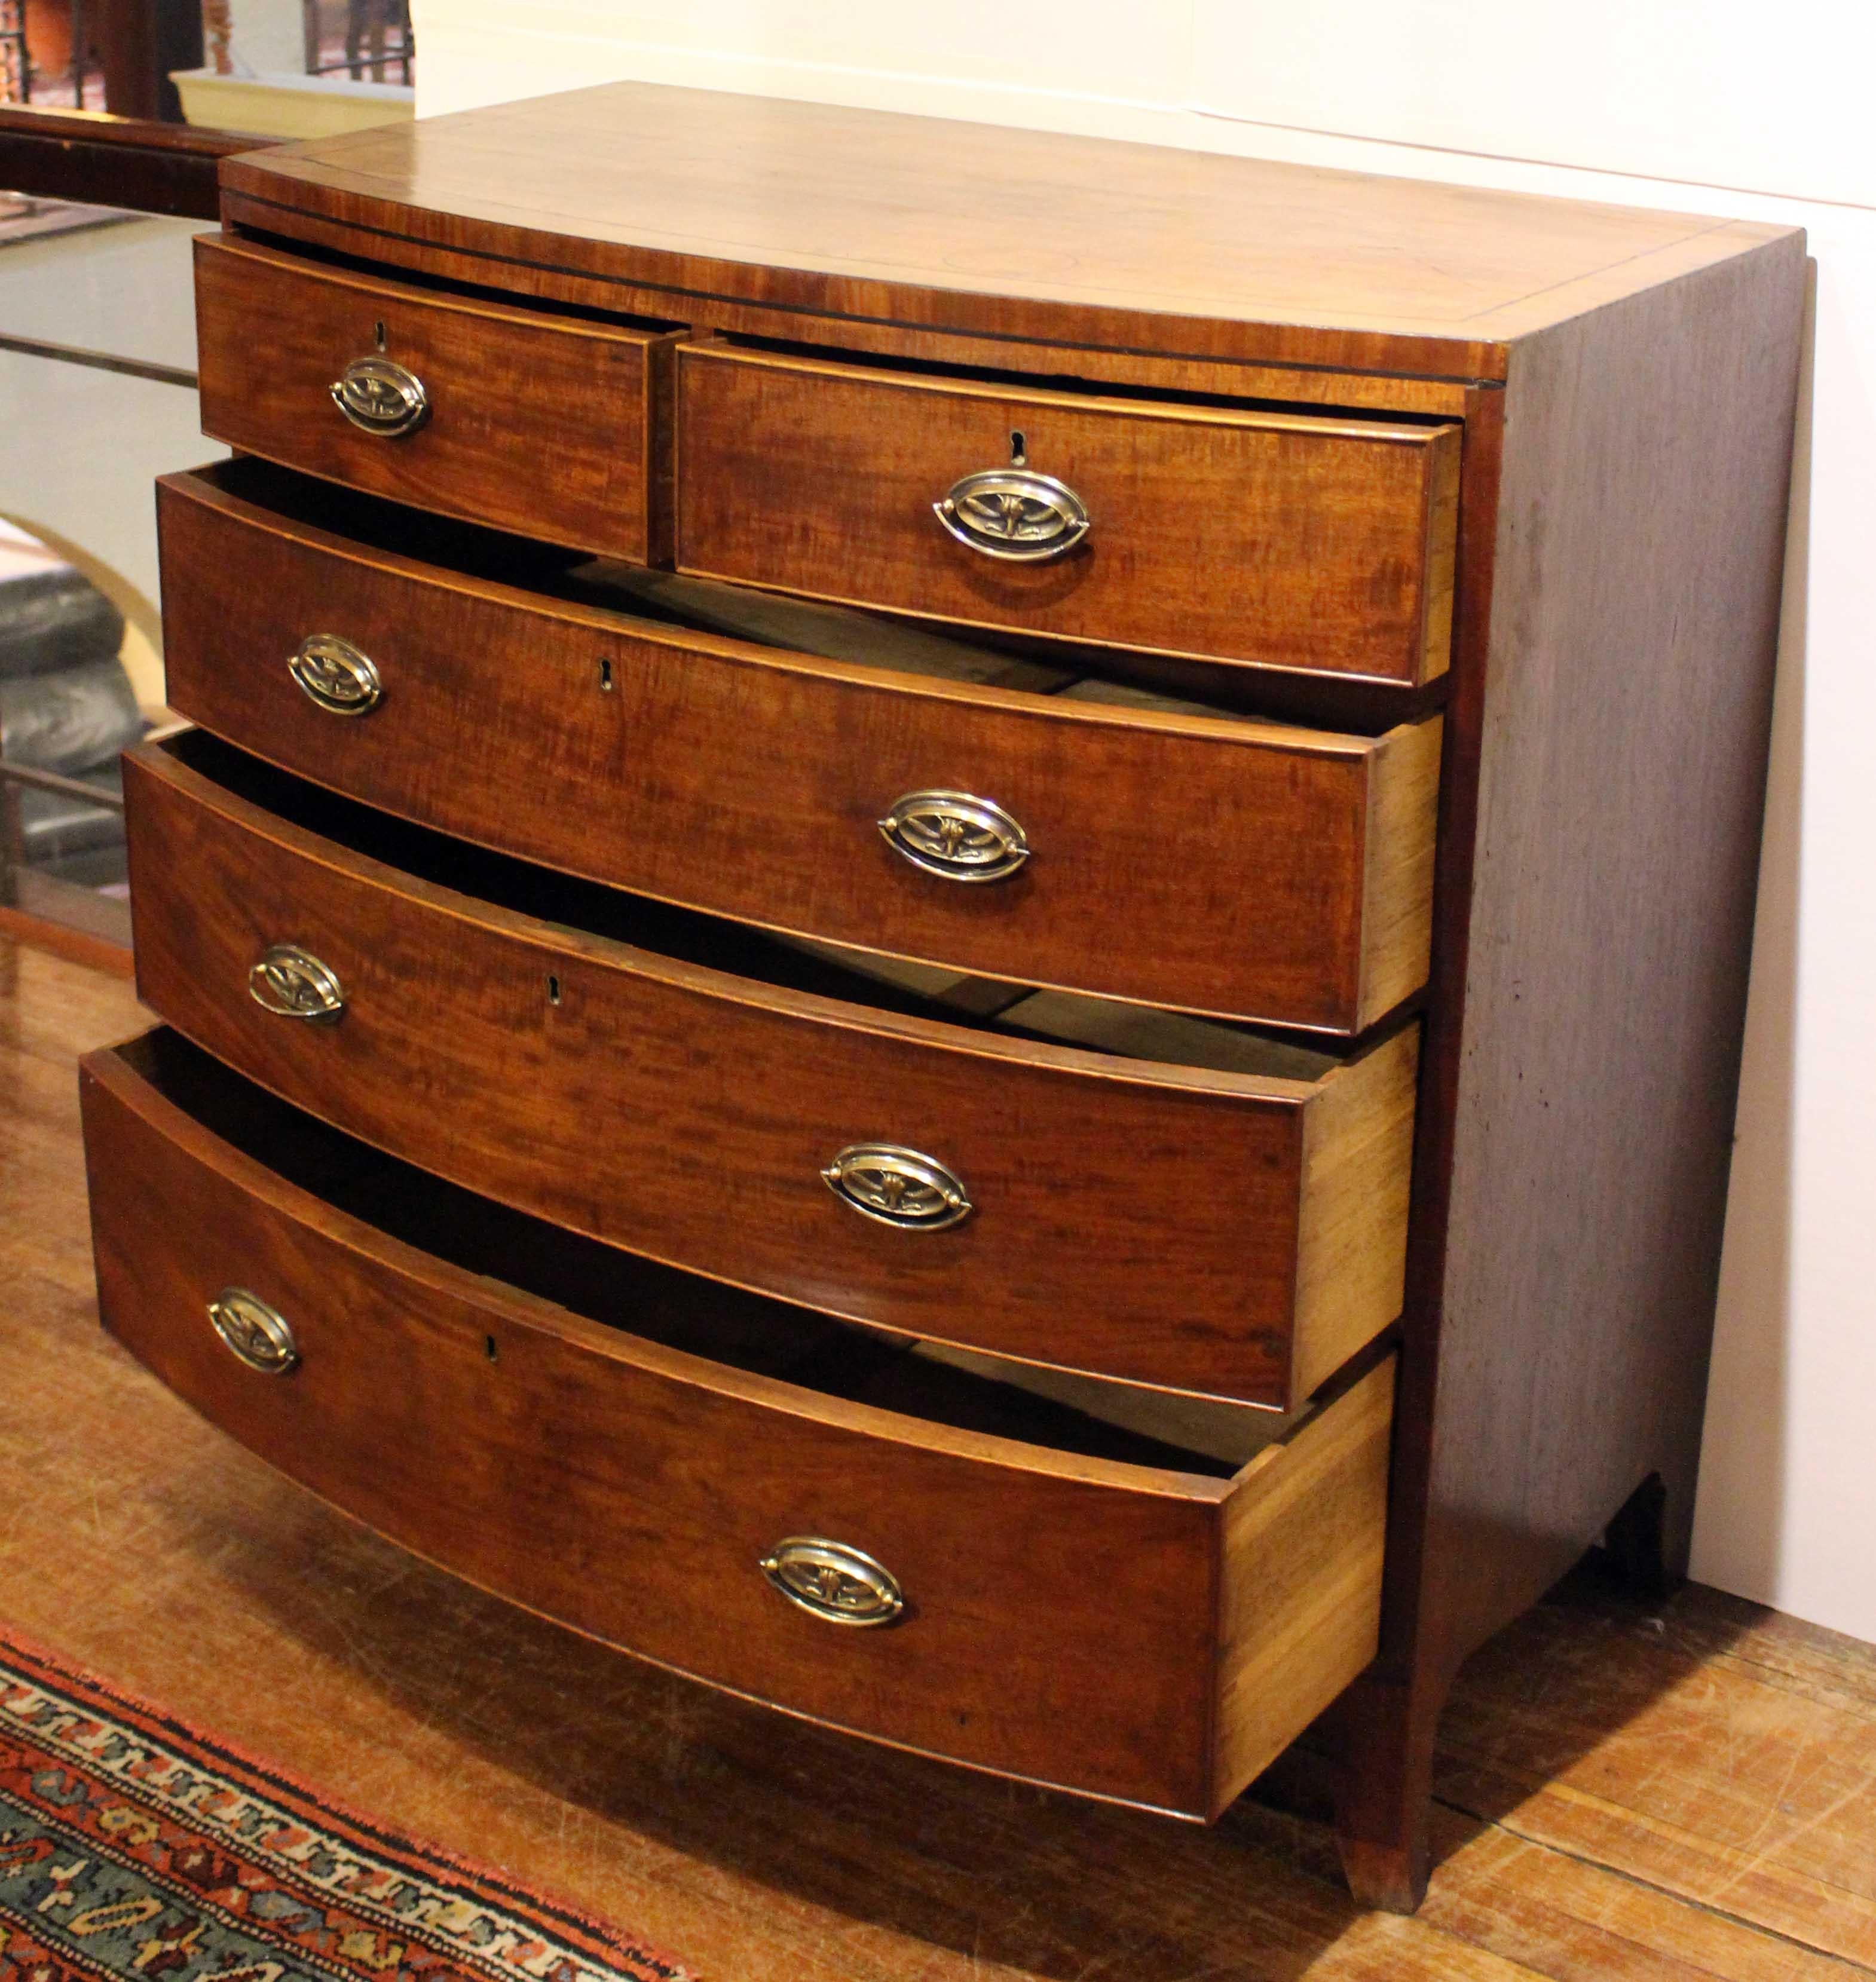 A Georgian period, c.1810, bowfront chest of drawers comprised of 2 short over 3 long drawers. Mahogany with ebony stringing. Oak & pine secondary woods. Replaced oval brass handles. Raised on French splay feet. Shaped apron complements the form.